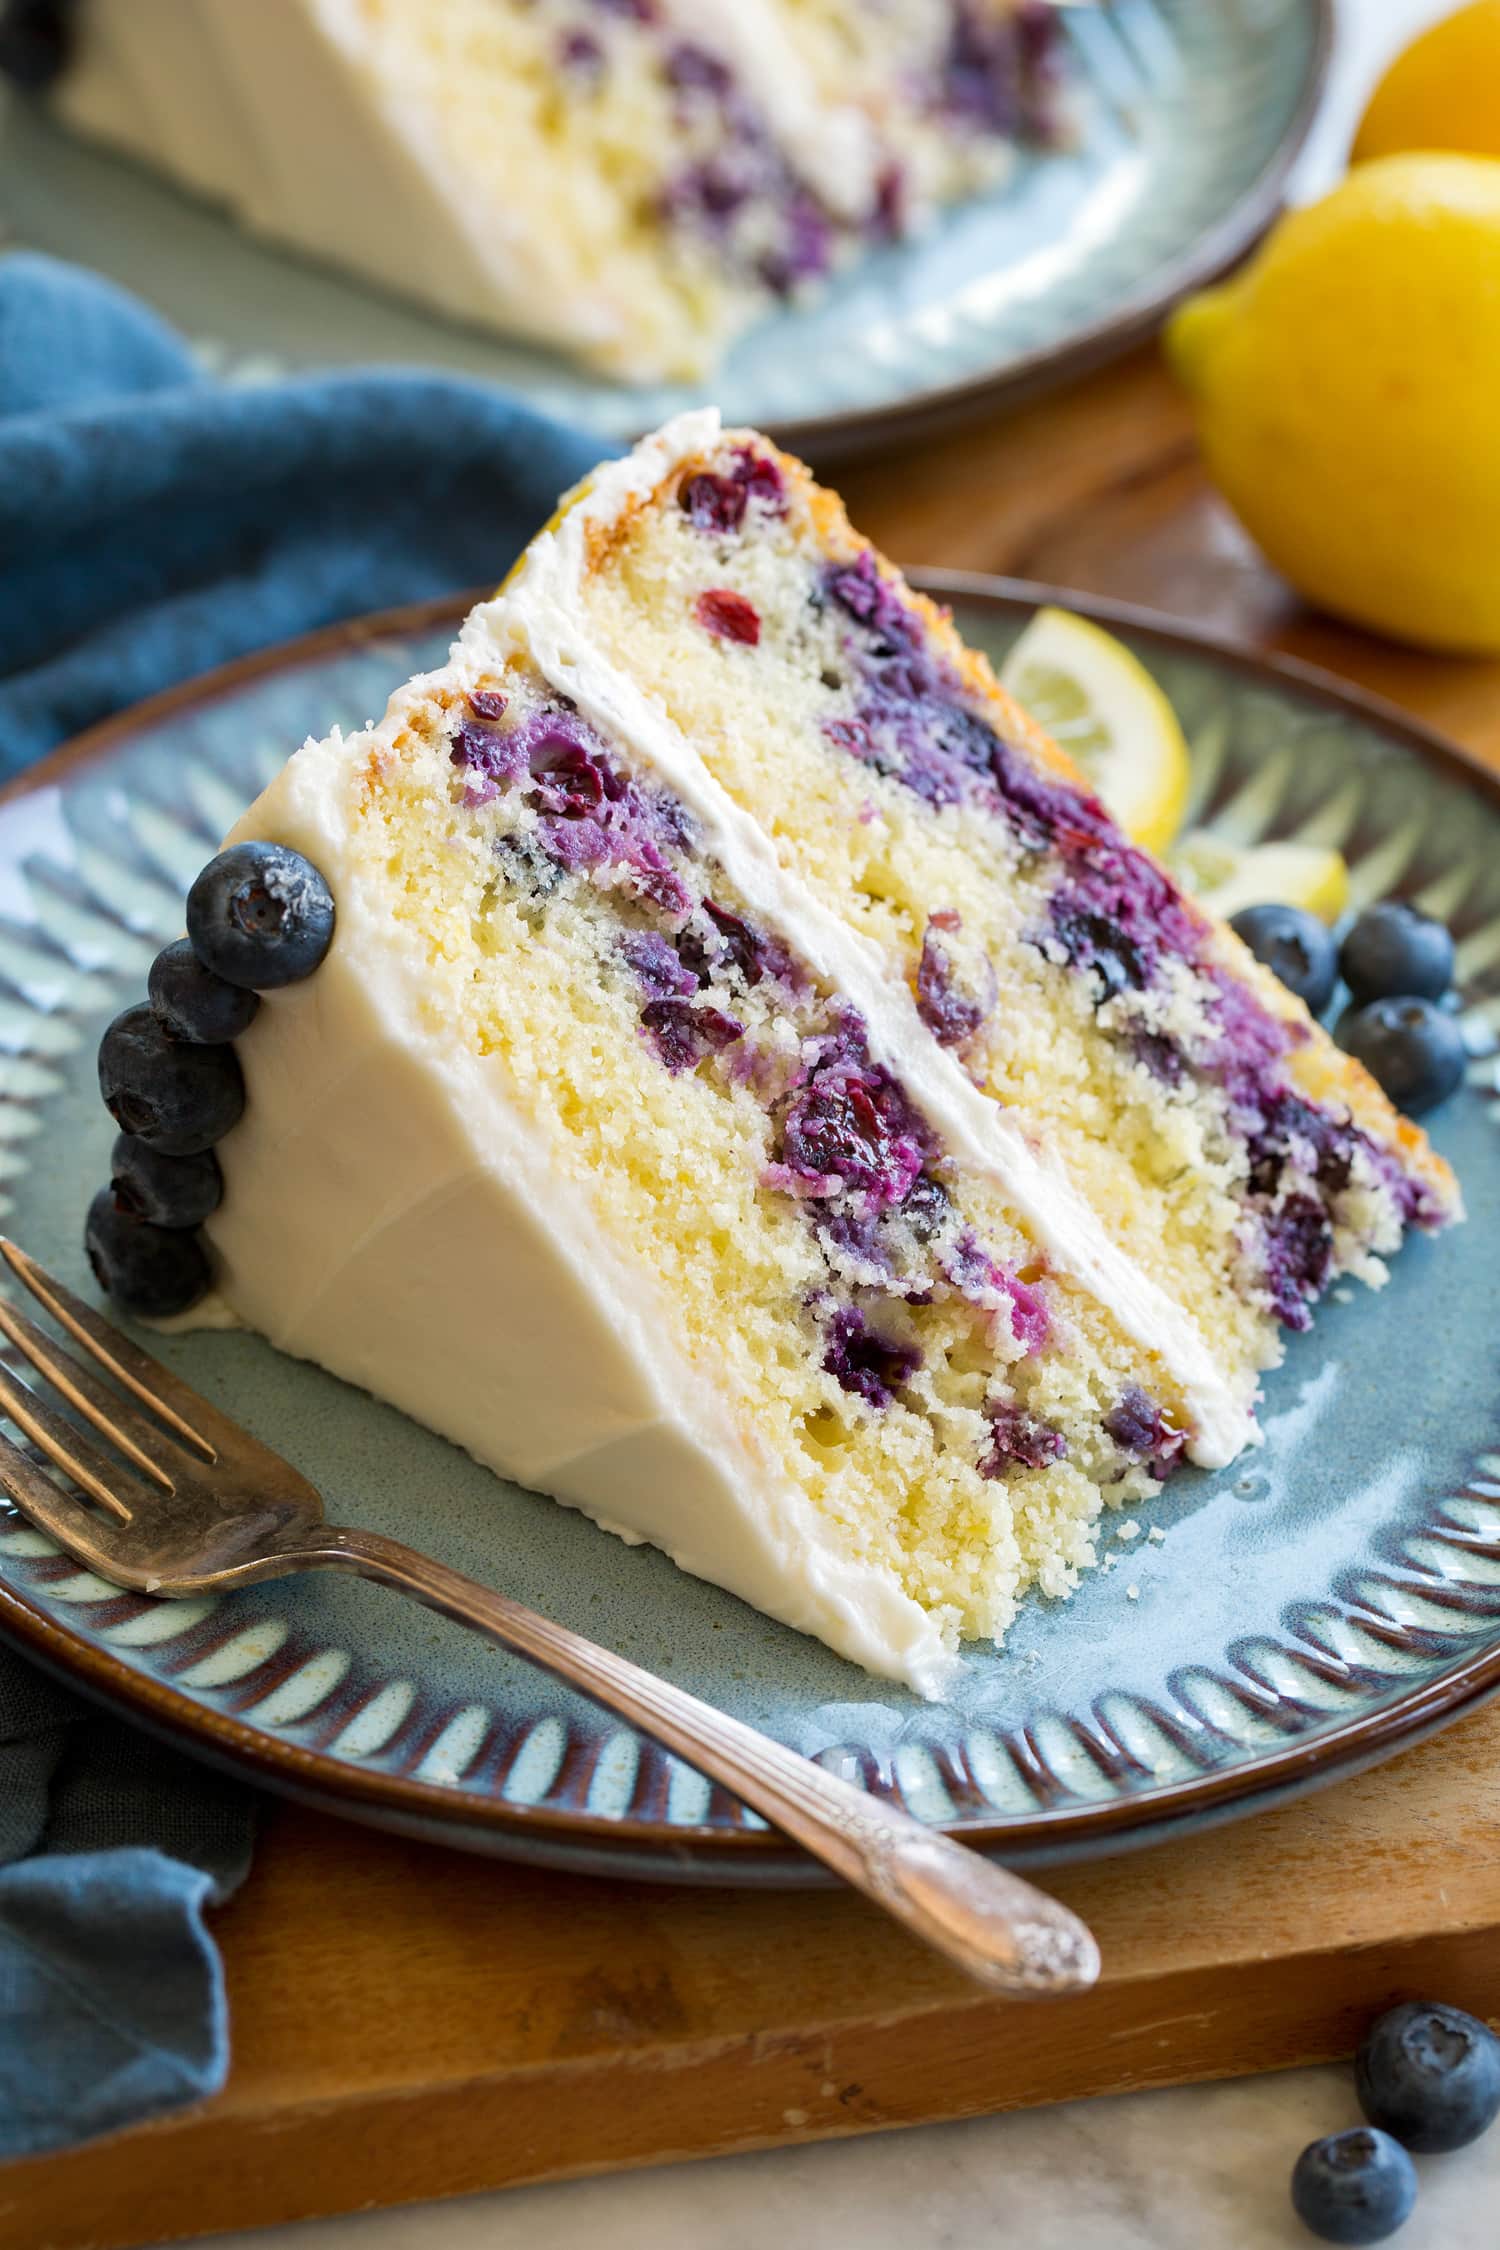 Slice of lemon blueberry cake with cream cheese frosting on a blue plate set over a wooden platter.